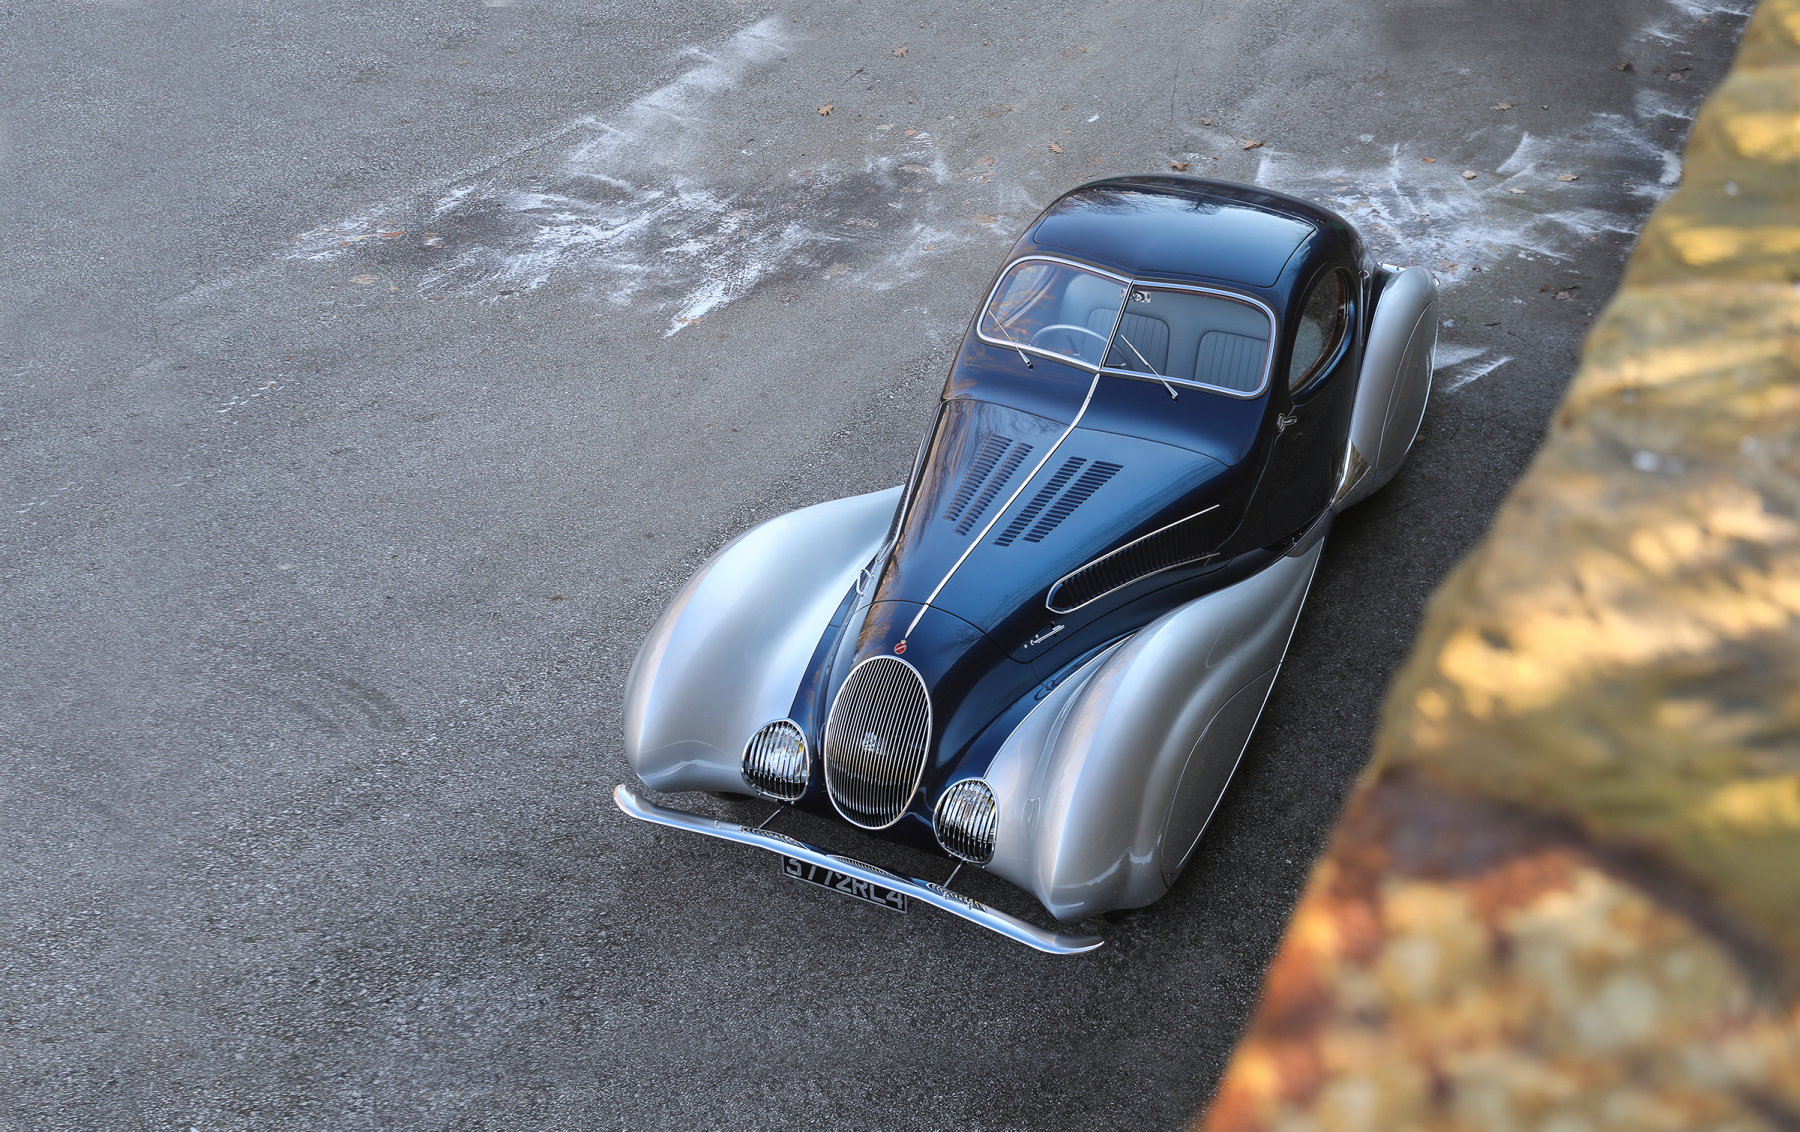 The 1938 Talbot-Lago T150-C-SS Teardrop Coupe